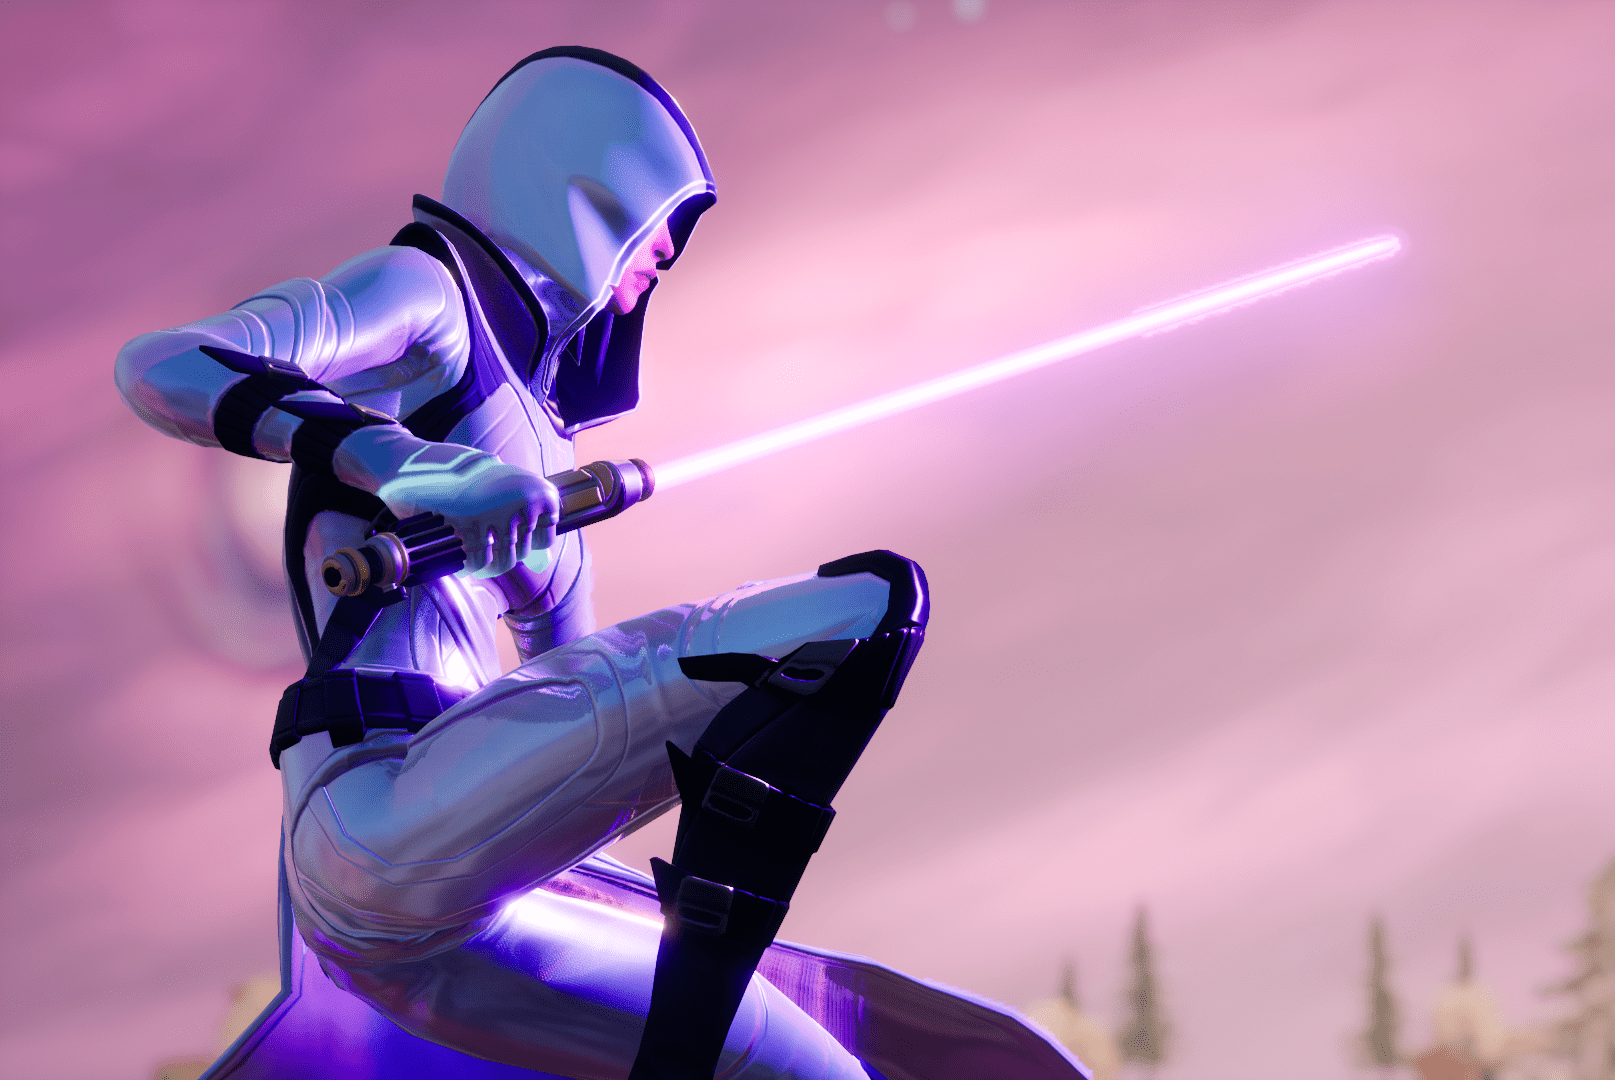 A person in a spacesuit crouches, holding a lightsaber. - Fortnite